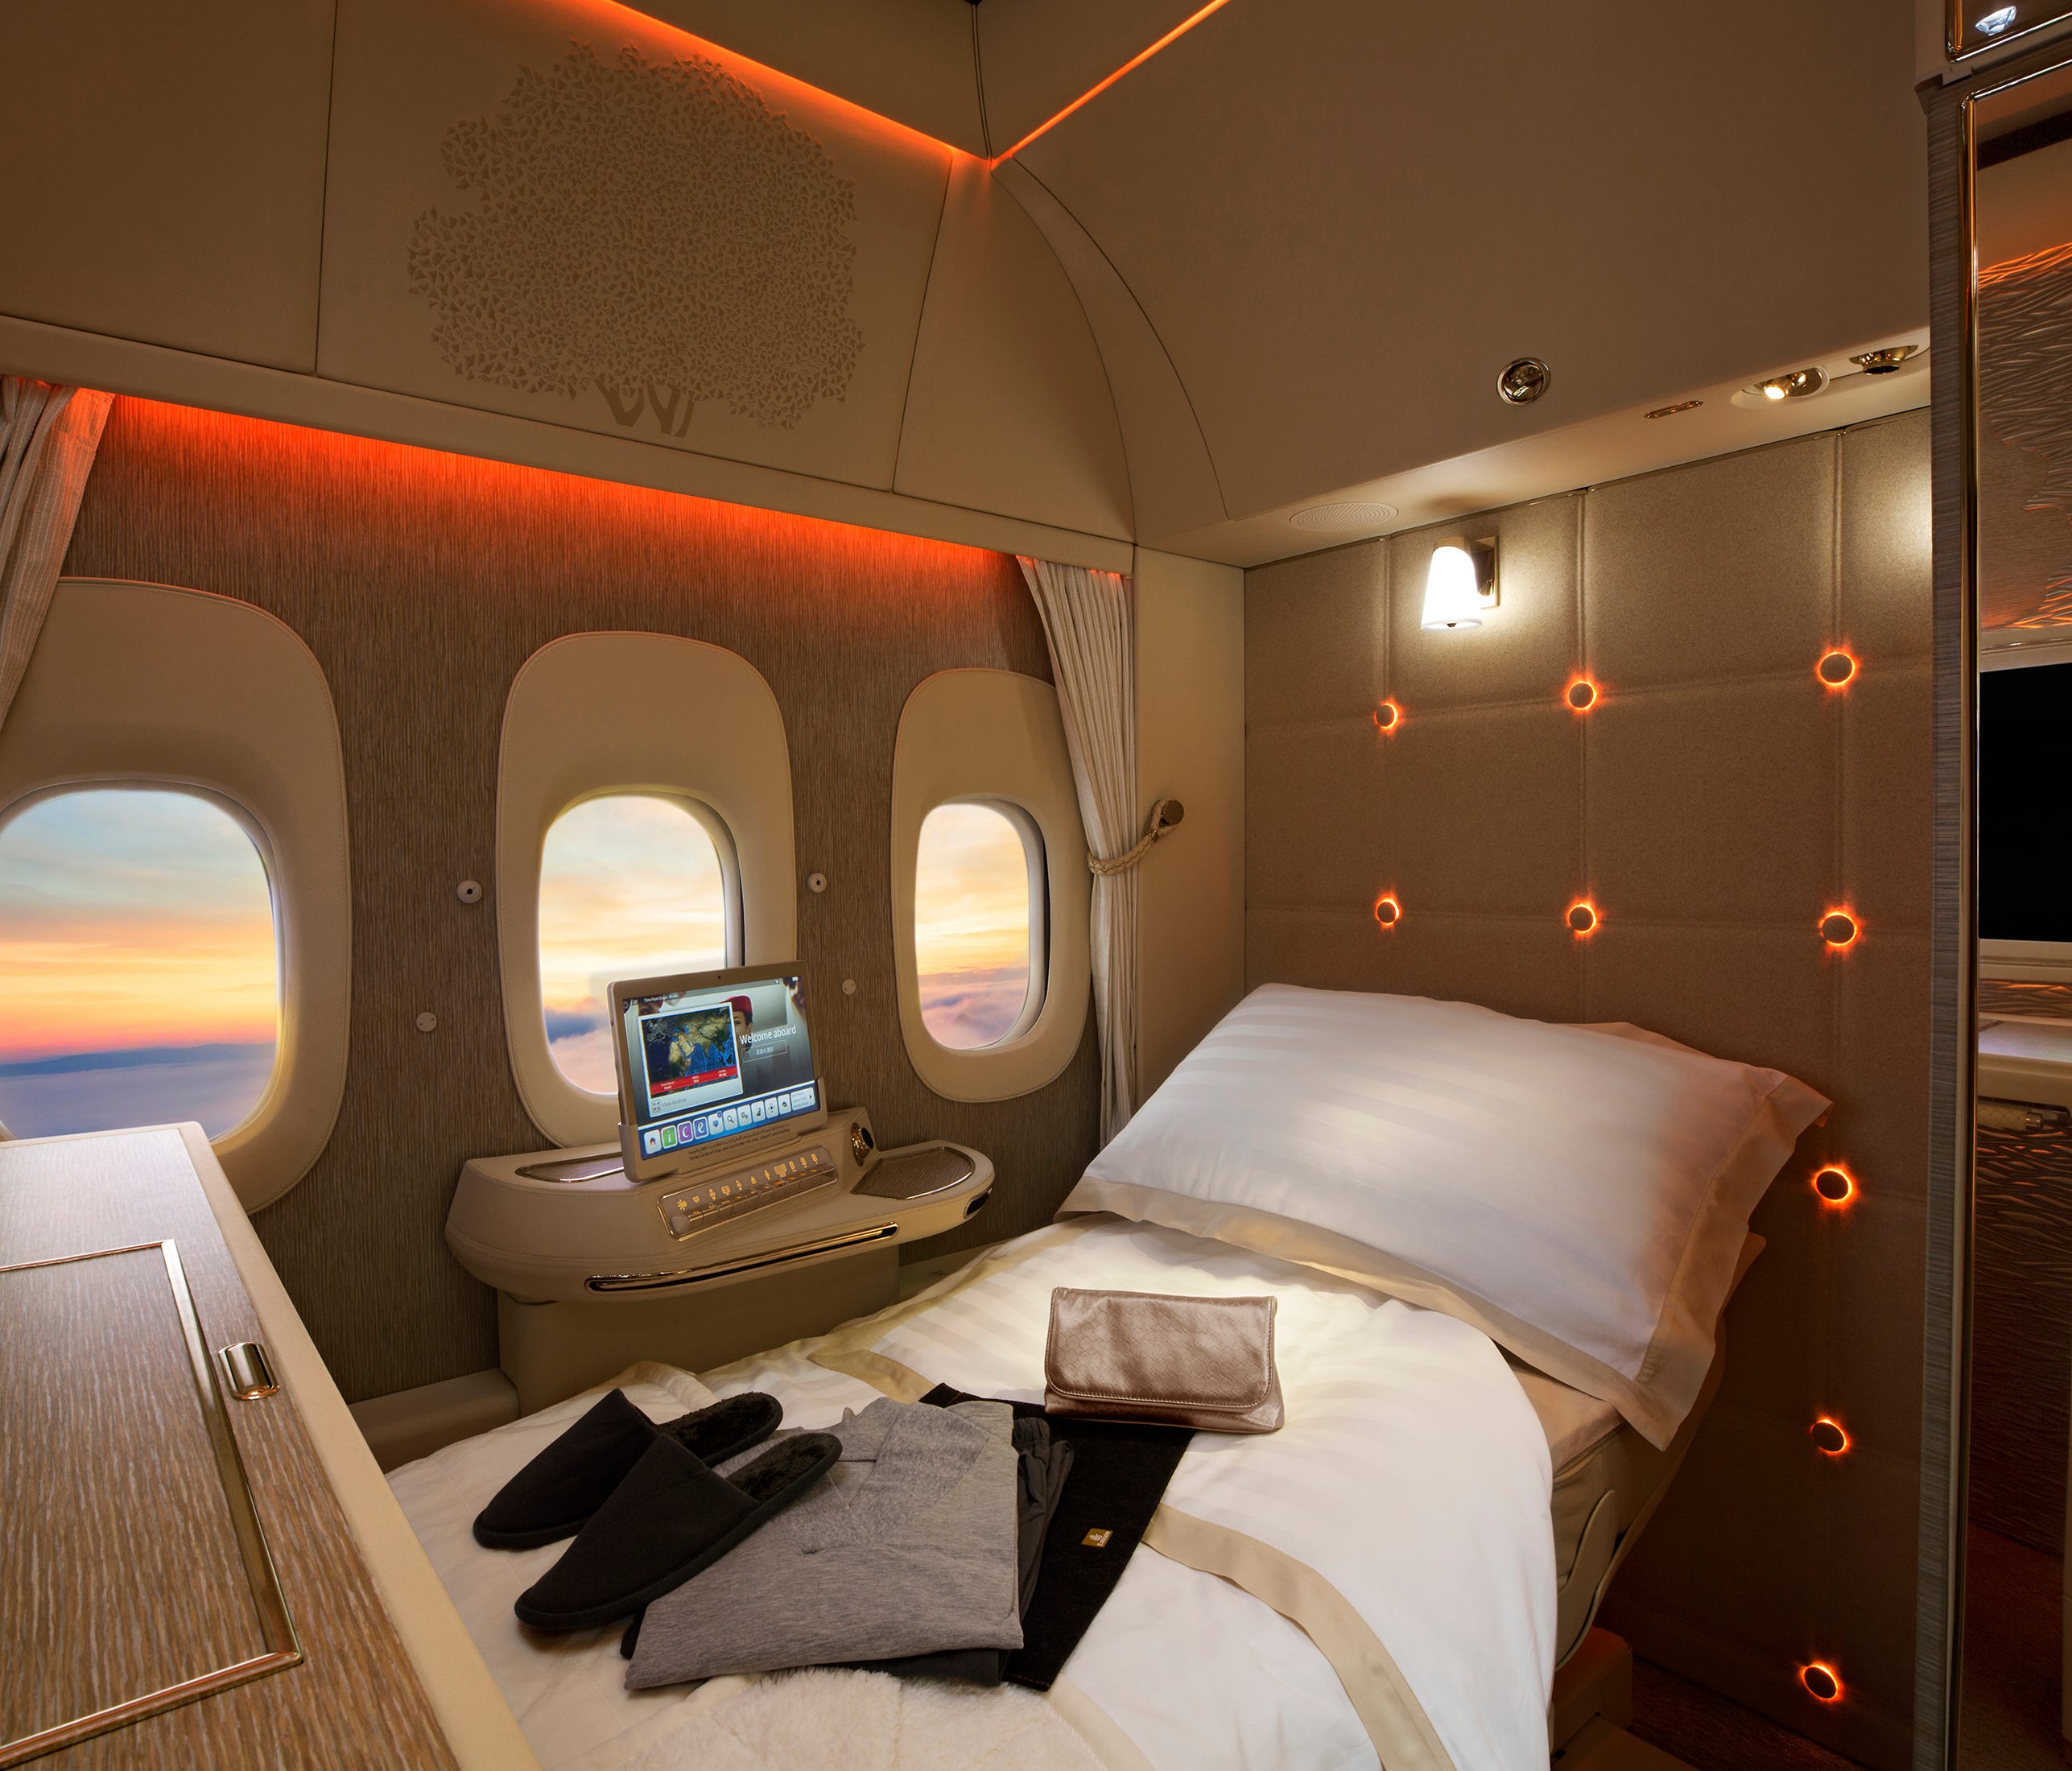 This staged photo, provided by Emirates, shows its new first-class 'suite' that will be offered on the carrier's Boeing 777 aircraft.